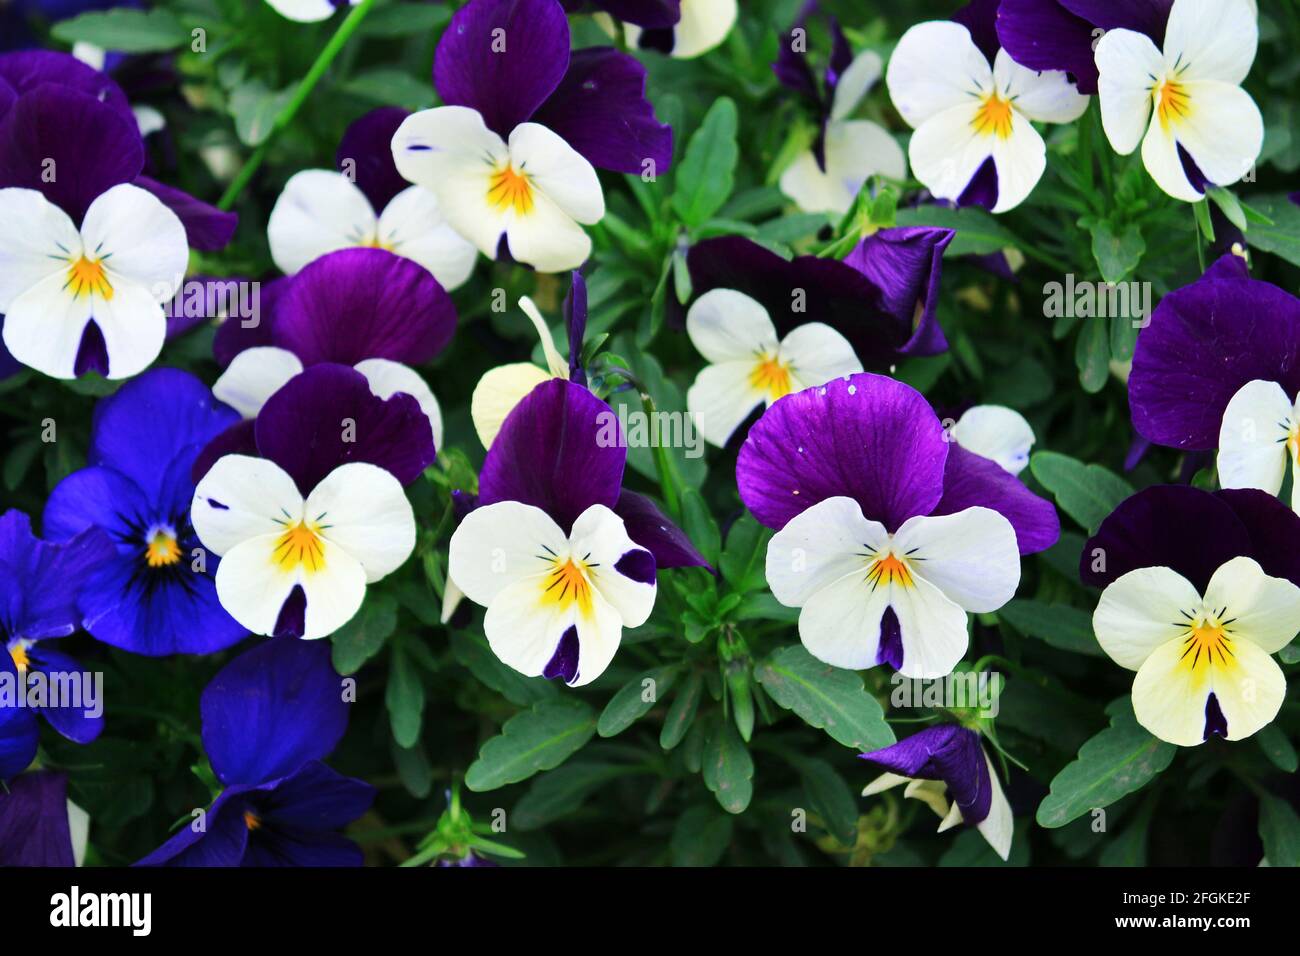 Brightly colored pansy flowers in full bloom Stock Photo